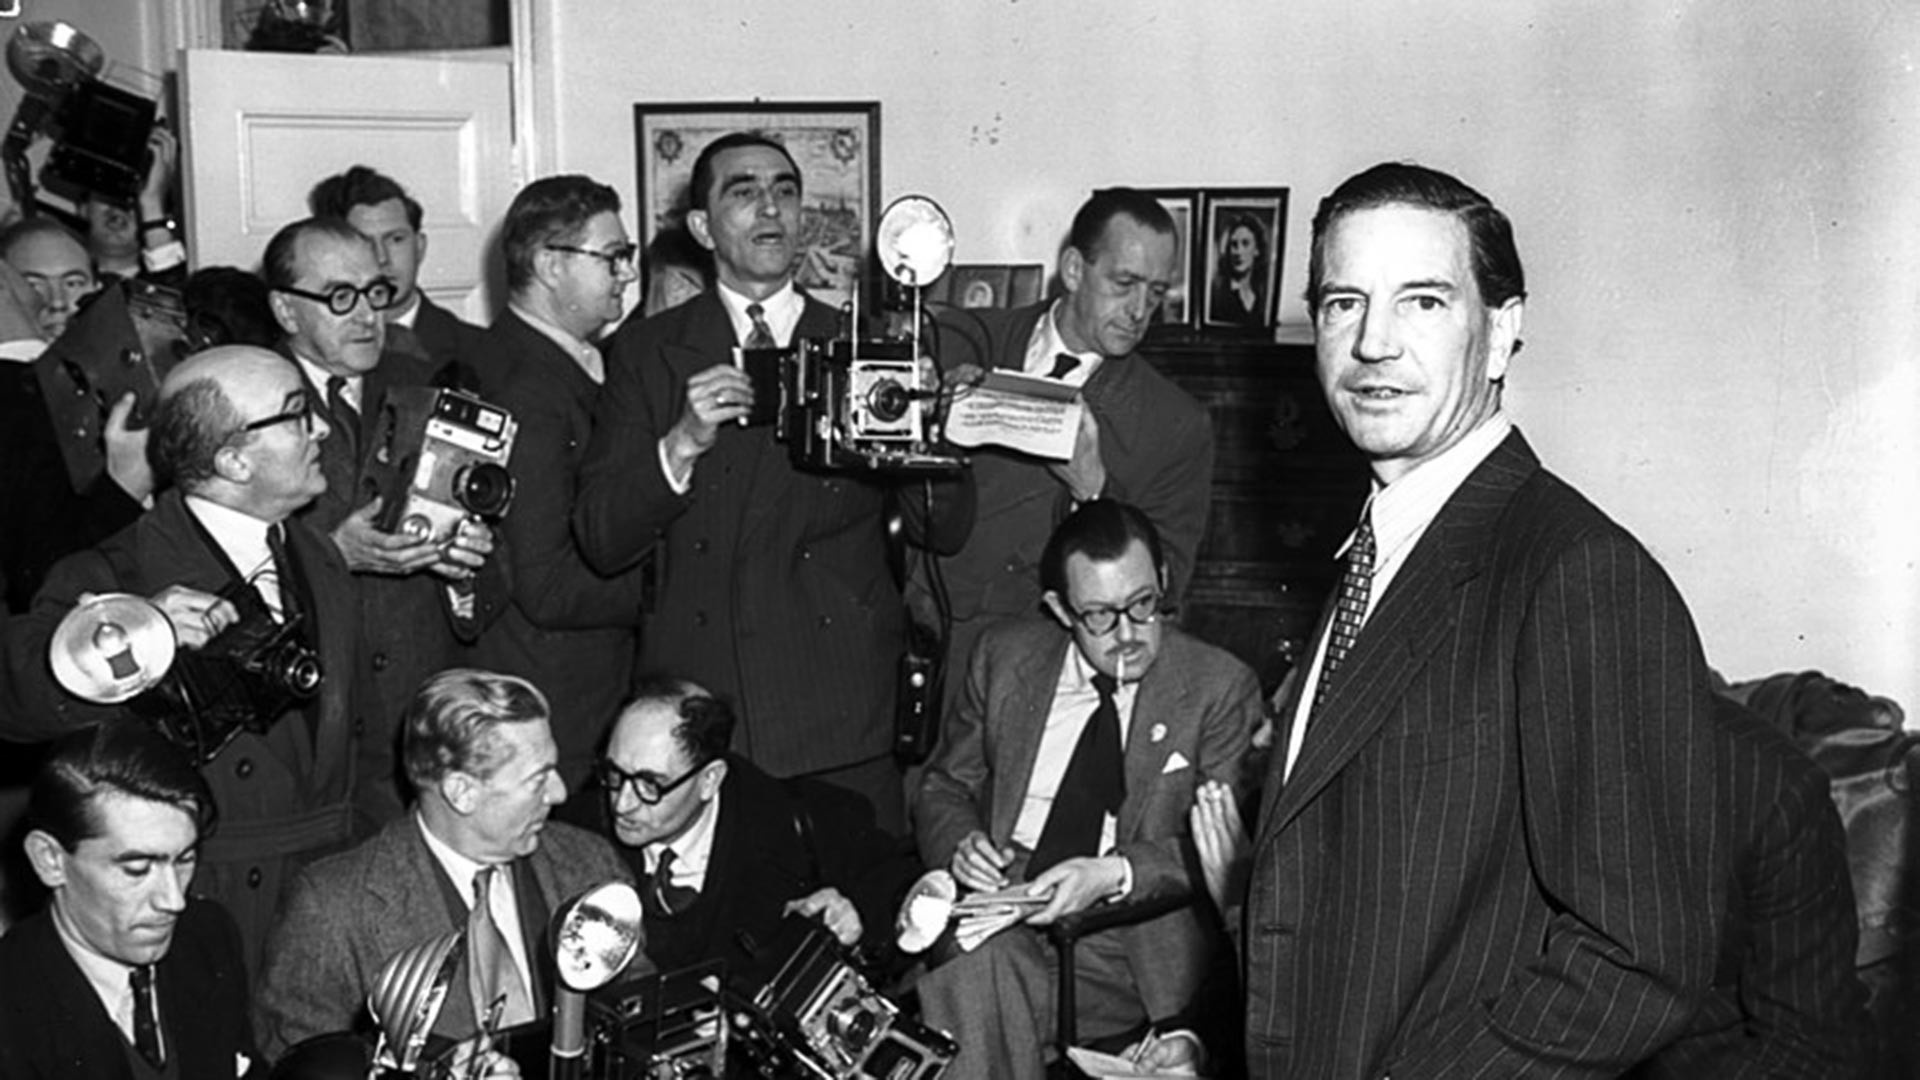 Kim Philby was the best-known member of the Cambridge Five Soviet spy ring in the UK.